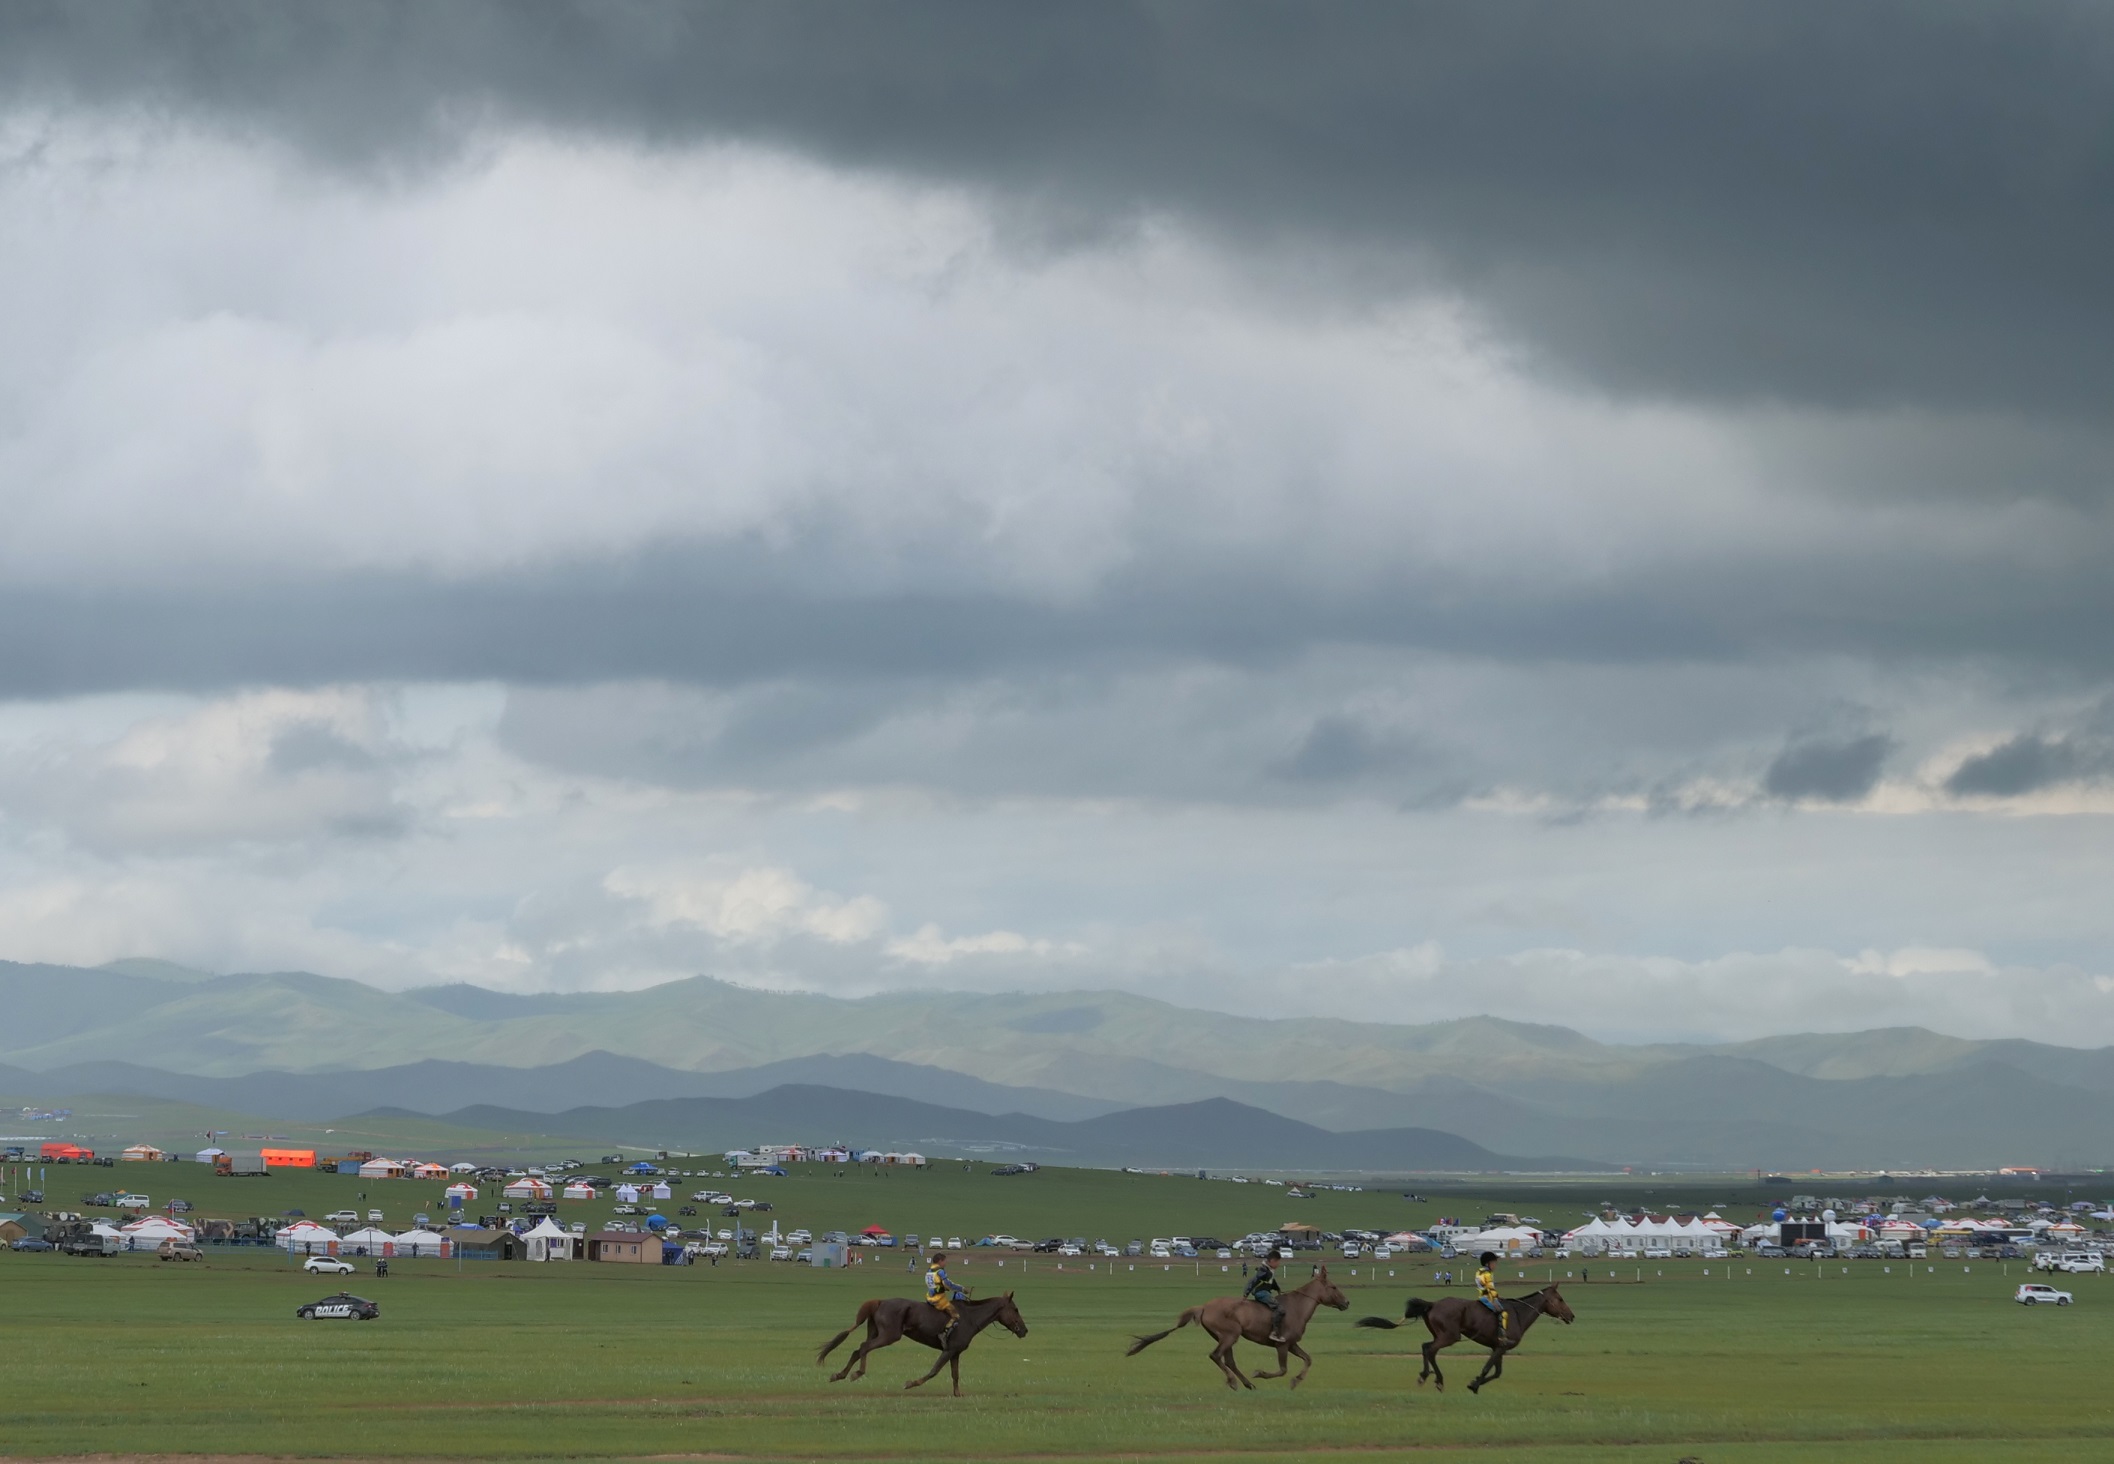 The race in the Mongolian prairie...